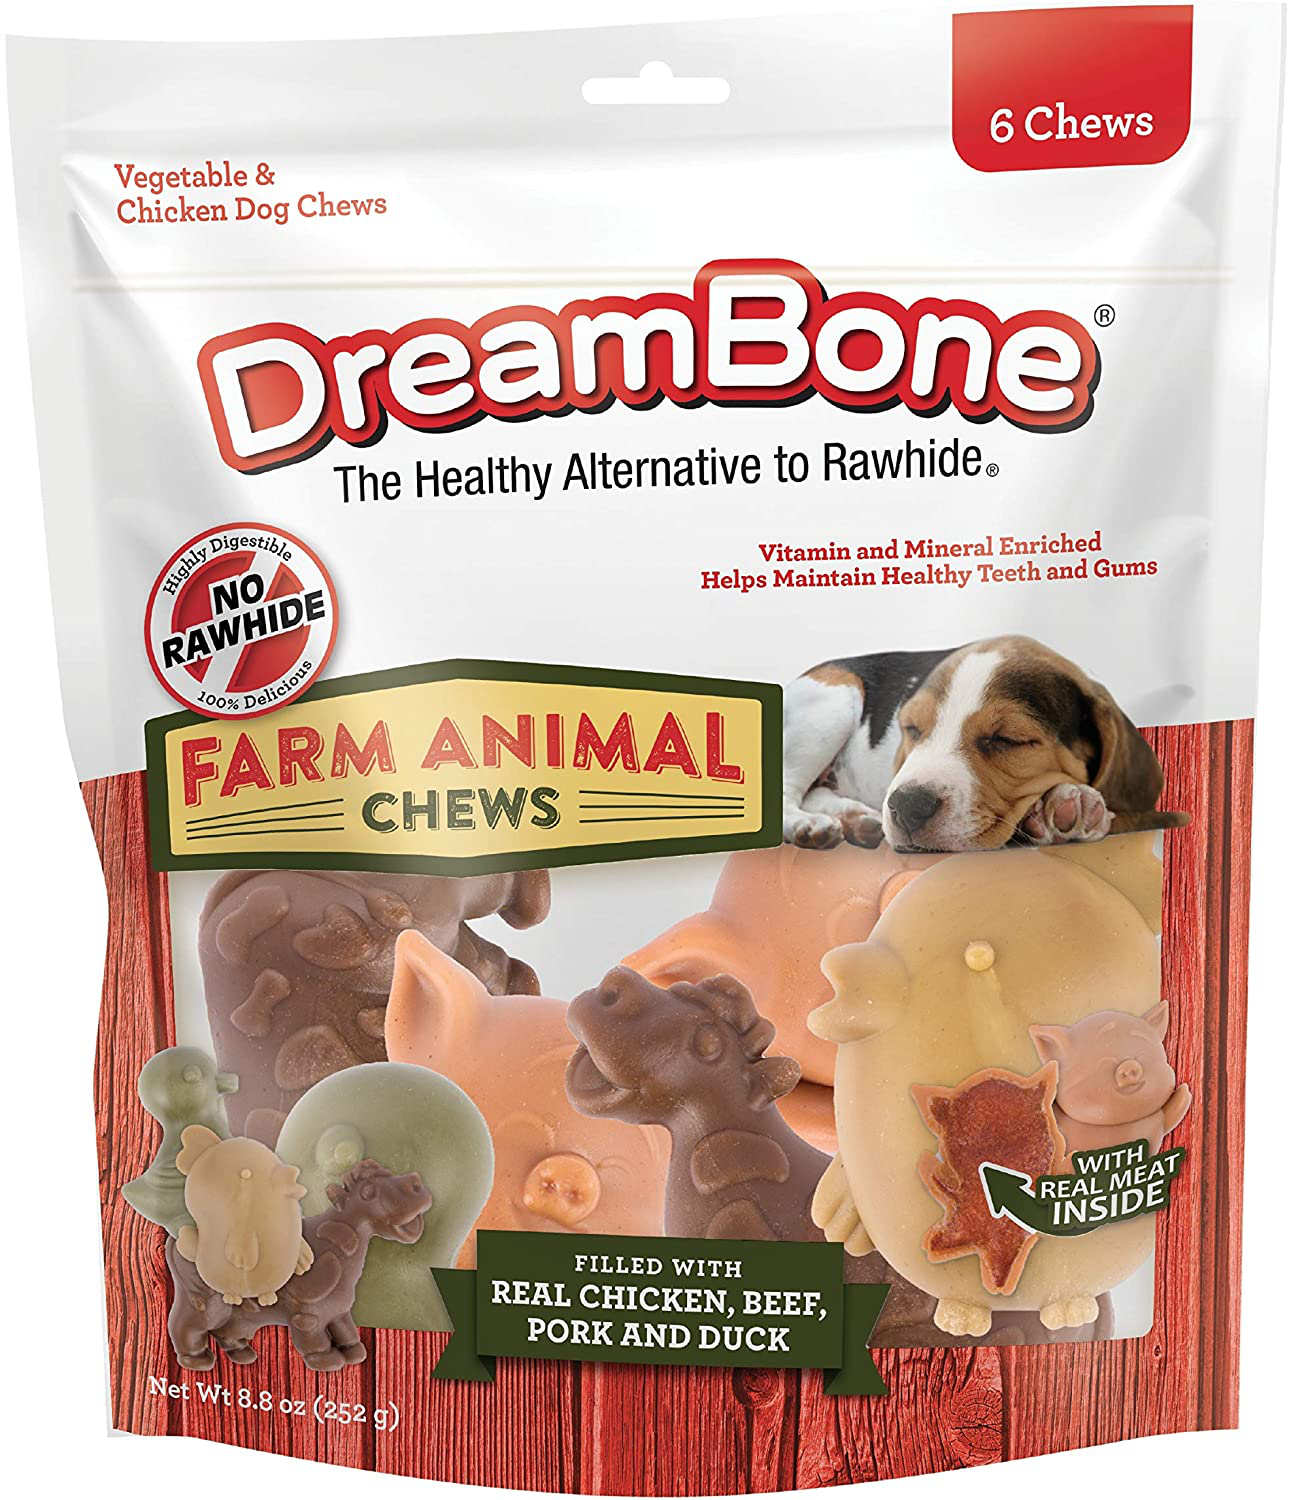 Dreambone Novelty Shaped Chews, Treat Your Dog to a Chew Made with Real Meat and Vegetables Animals & Pet Supplies > Pet Supplies > Dog Supplies > Dog Treats DreamBone Farm Animal Chews 6 Count (Pack of 1) 